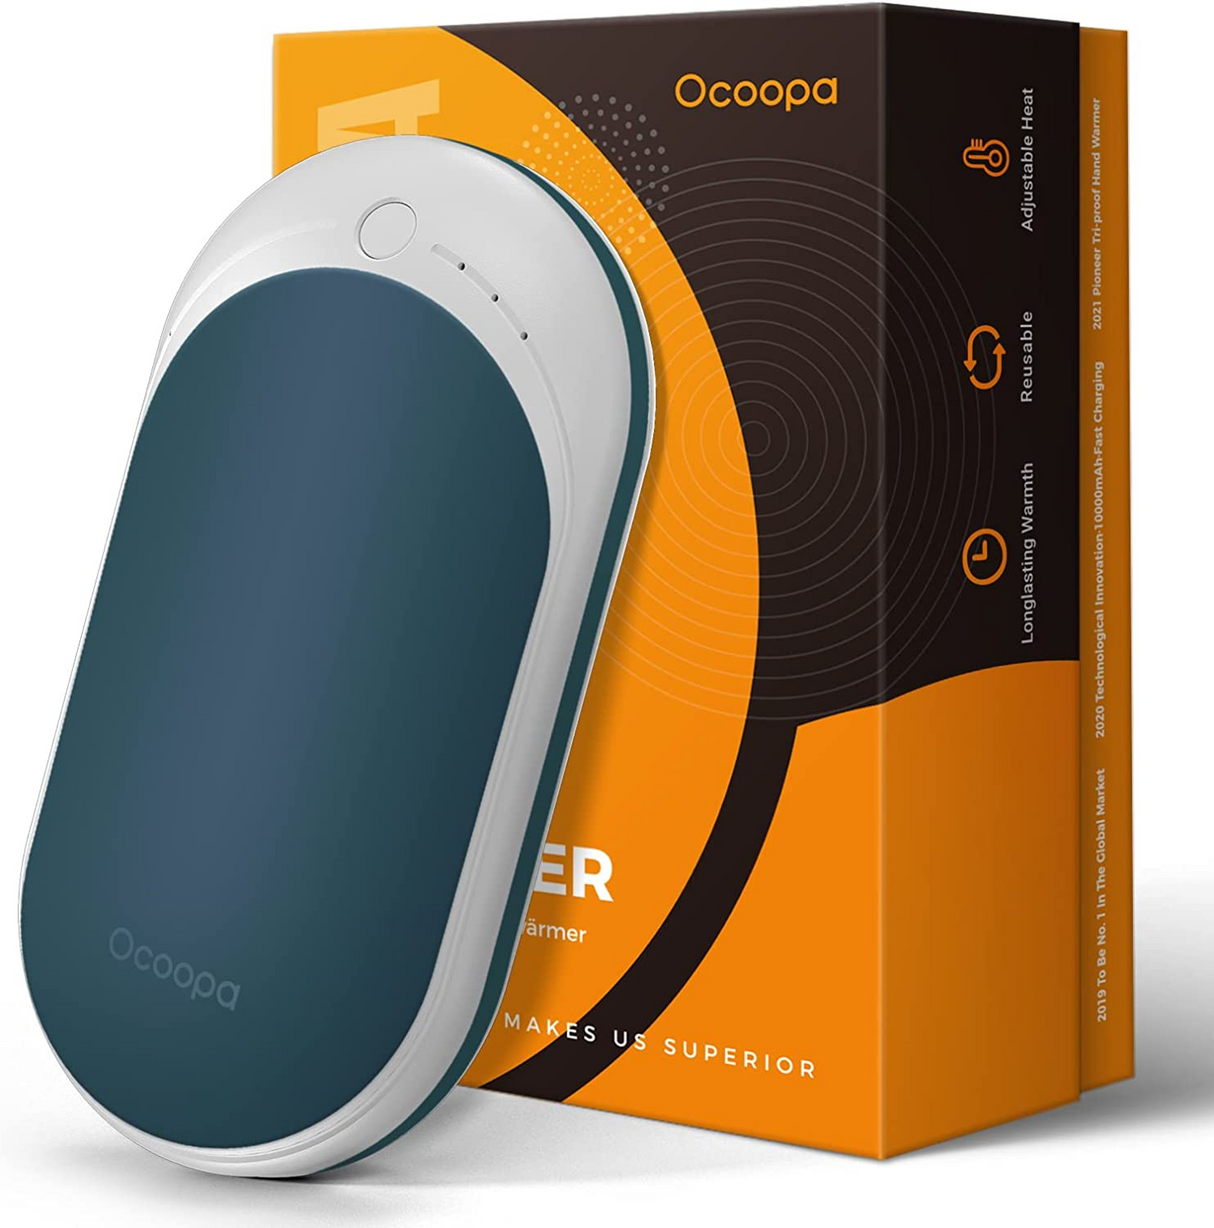 Ocoopa 118s - Chauffe-mains rechargeable 5 200 mAh